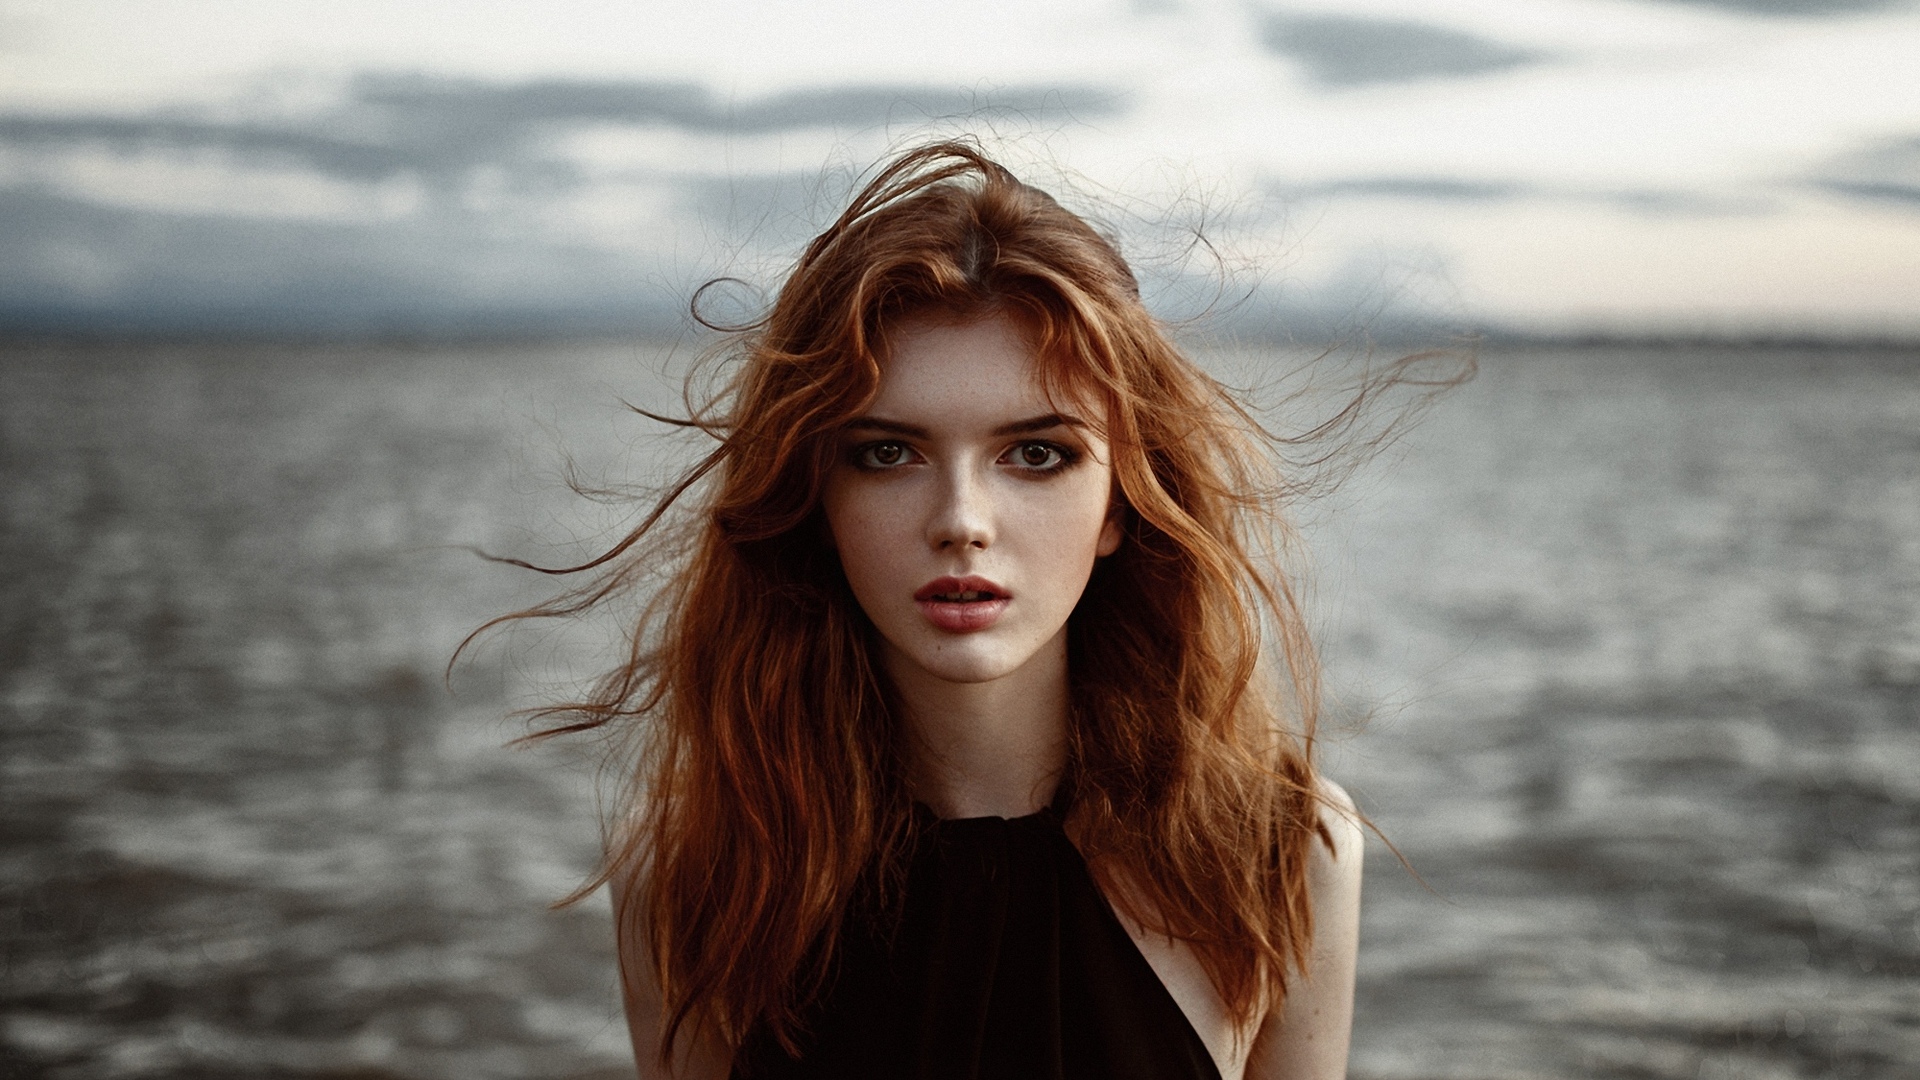 Women Model Face Redhead Nature Outdoors Aleksey Trifonov Frontal View 1920x1080